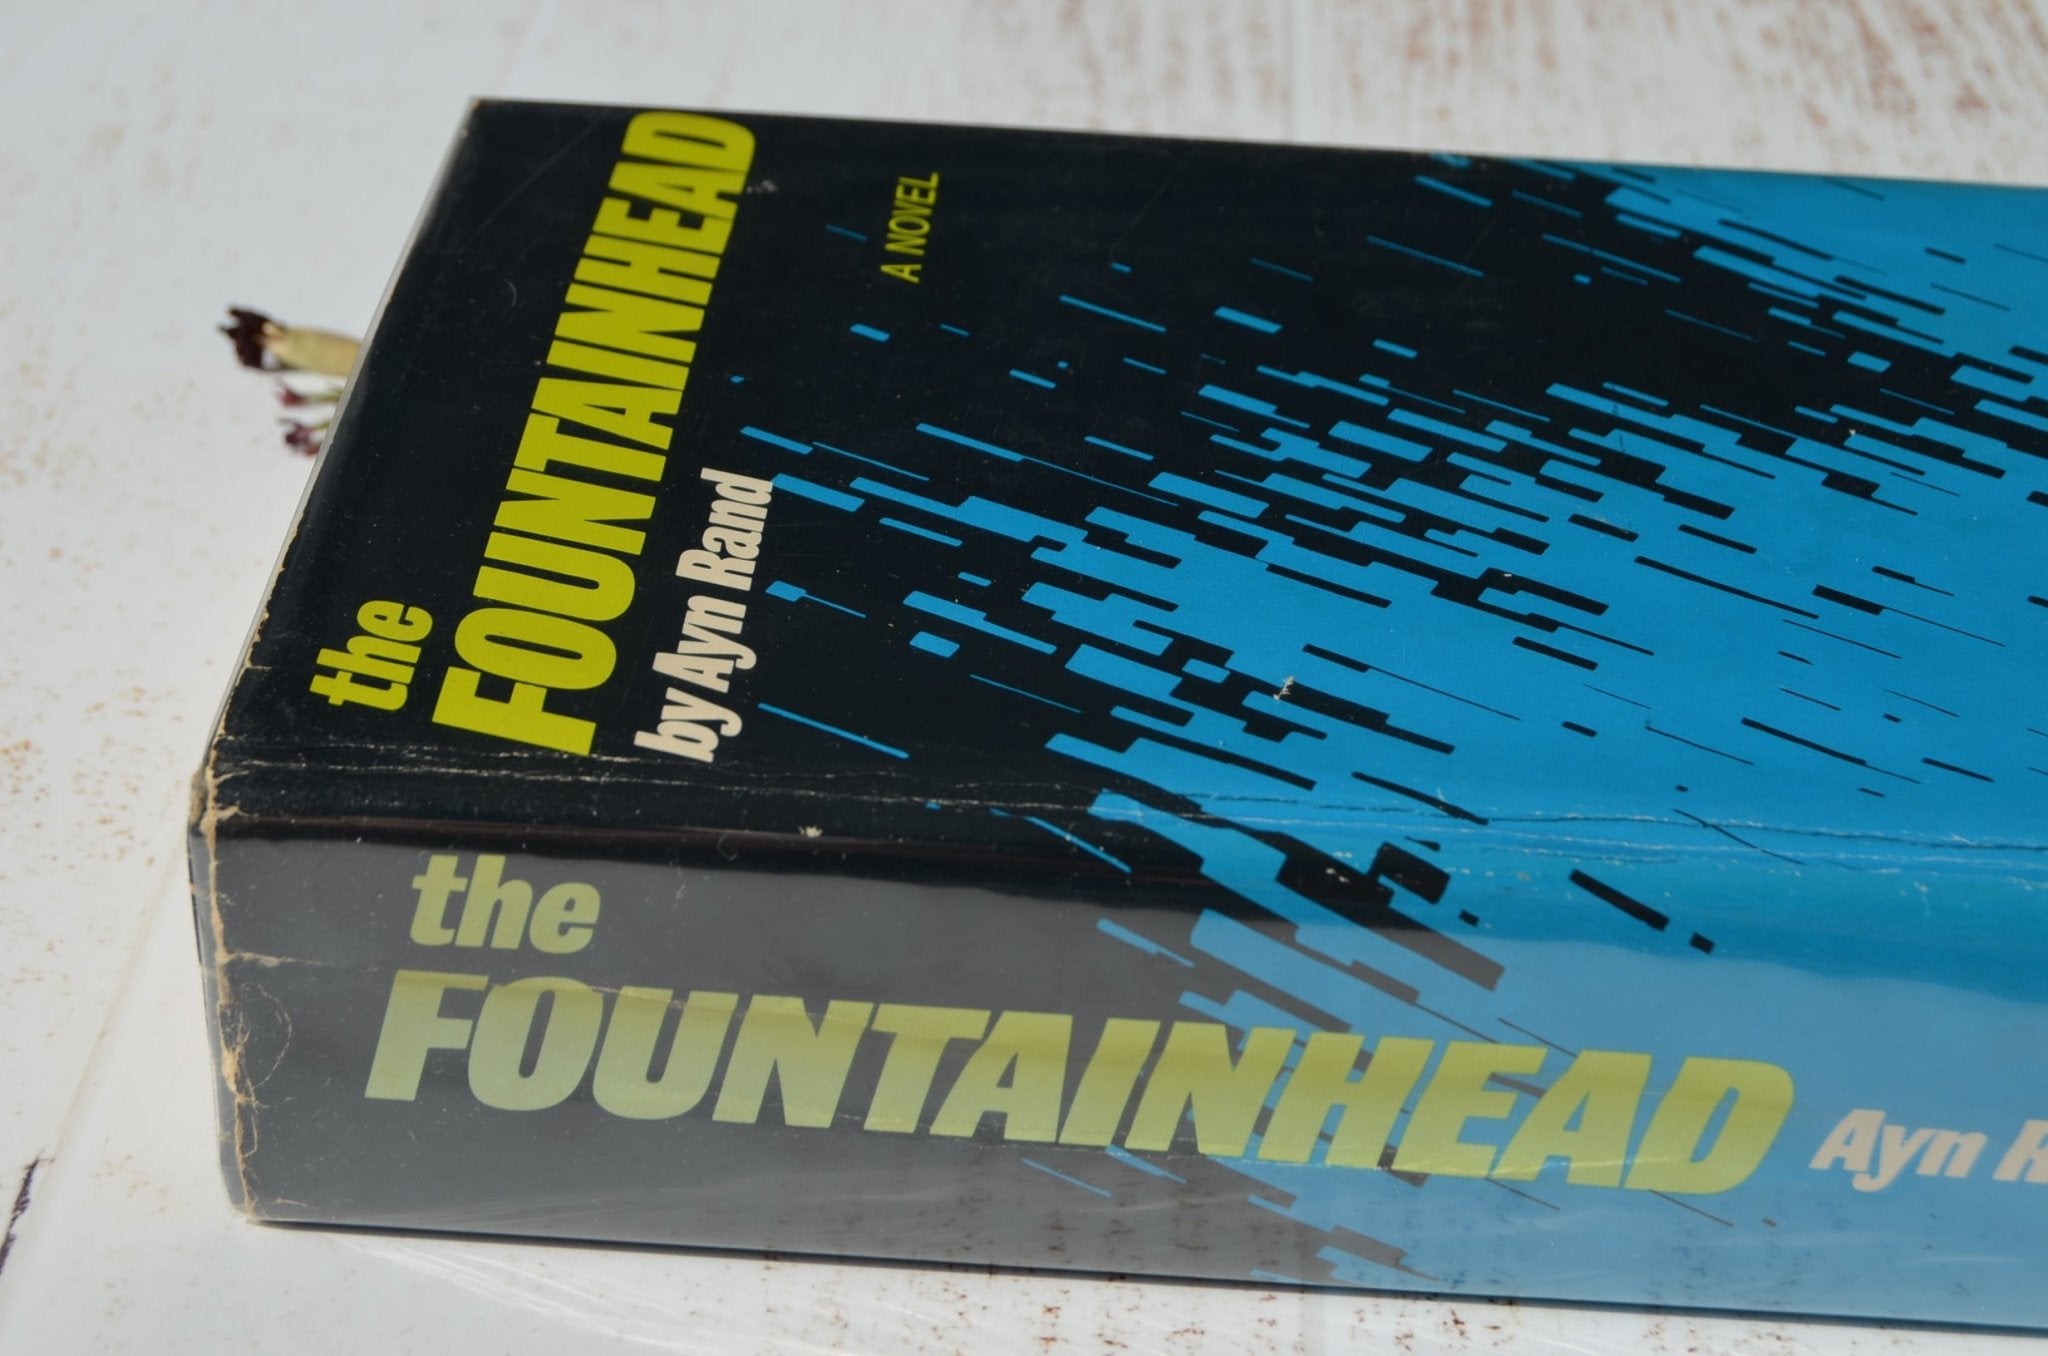 Vintage Book Club Edition – The Fountainhead by Ayn Rand 1943 - Brookfield Books